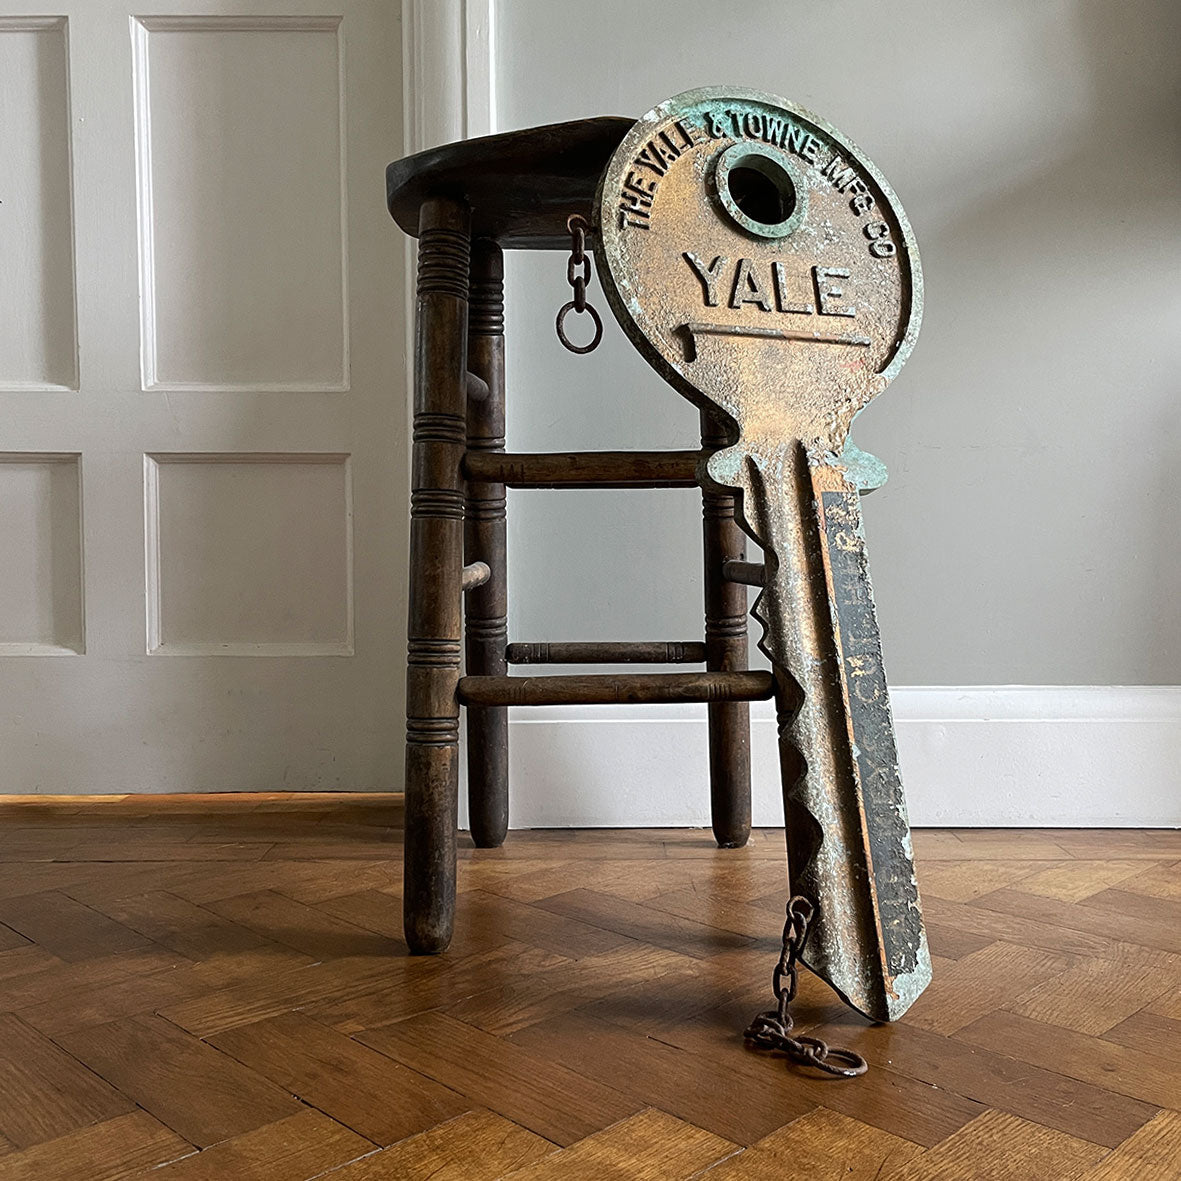 A large cast metal oversized Yale key with its original hanging chains, used as an advertisement display in locksmith shops and ironmongers. It has its original gilt paint finish that has weathered over the yeas to achieve the most amazing patinated finish. Hangs horizontal when suspended on its chains - SHOP NOW - www.intovintage.co.uk